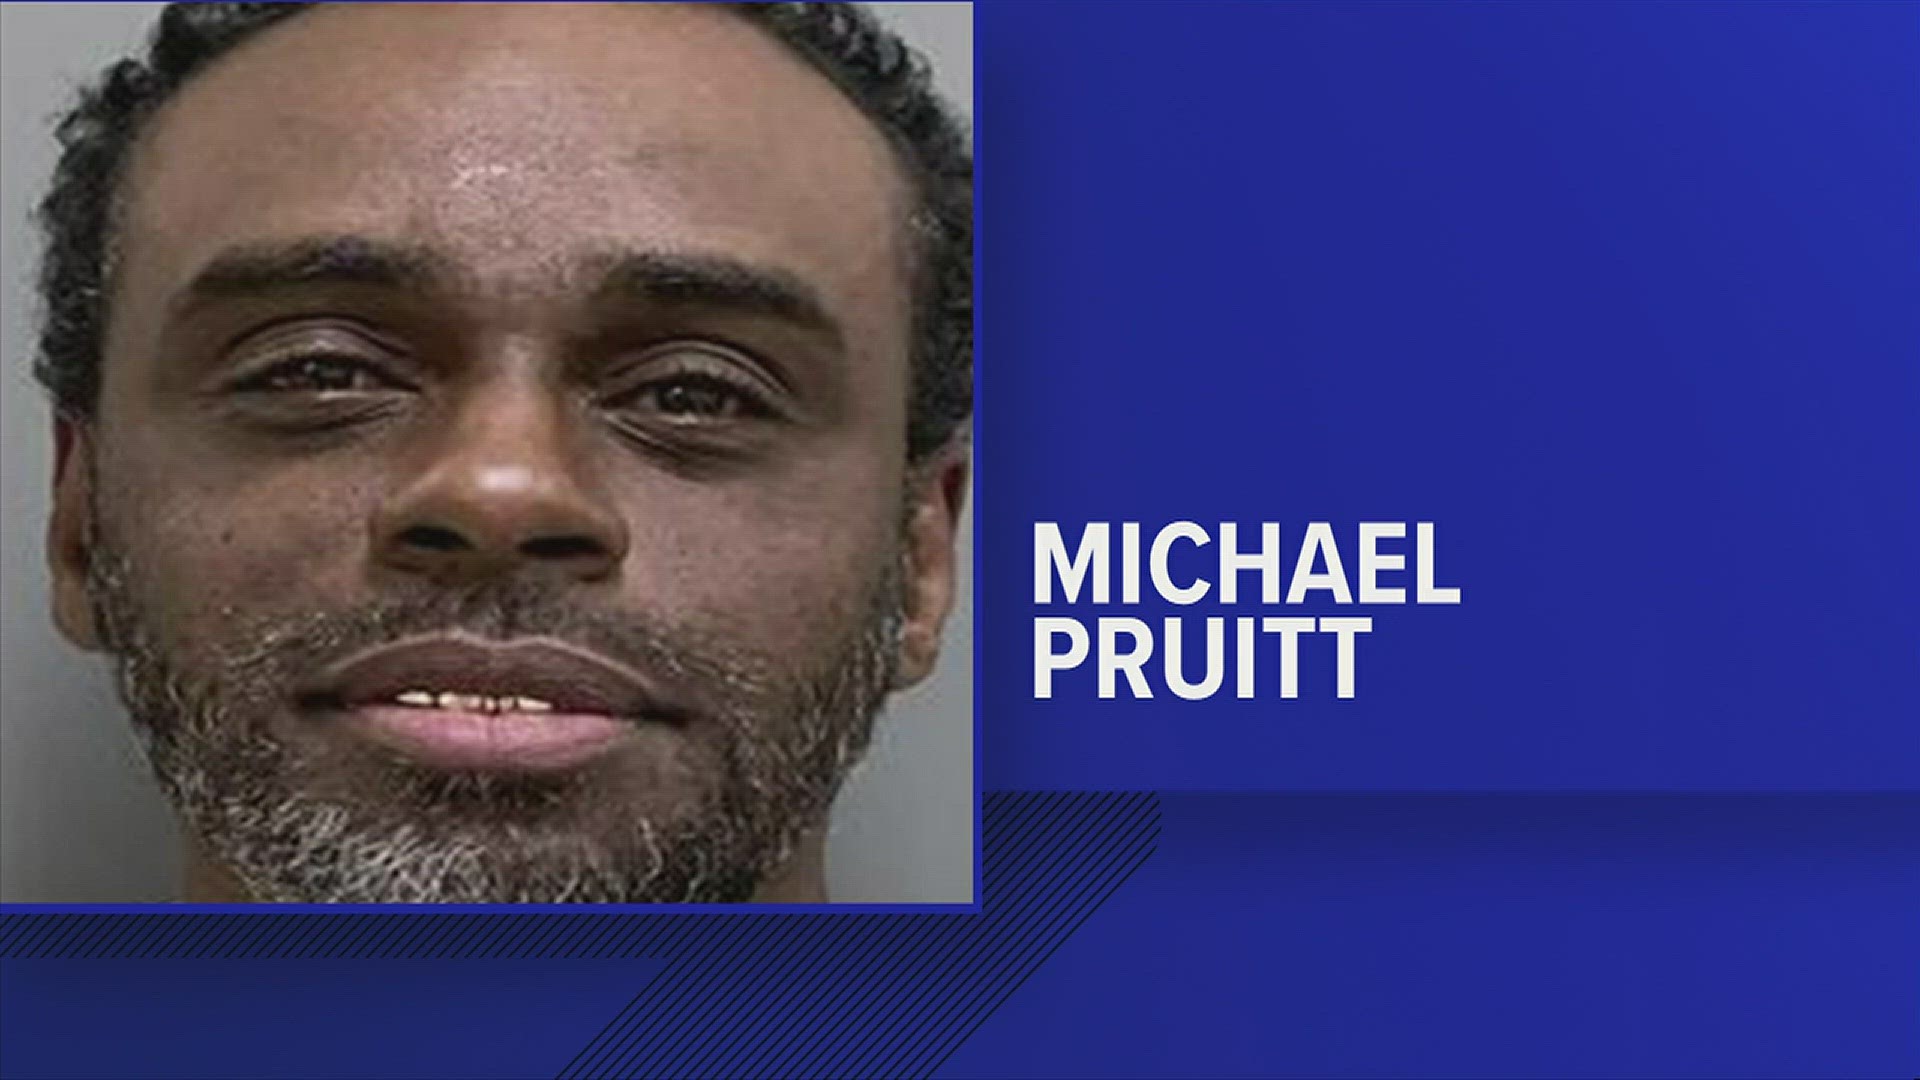 Michael Pruitt allegedly held officers at bay for nearly six hours on Wednesday, causing a lockdown at a nearby school.